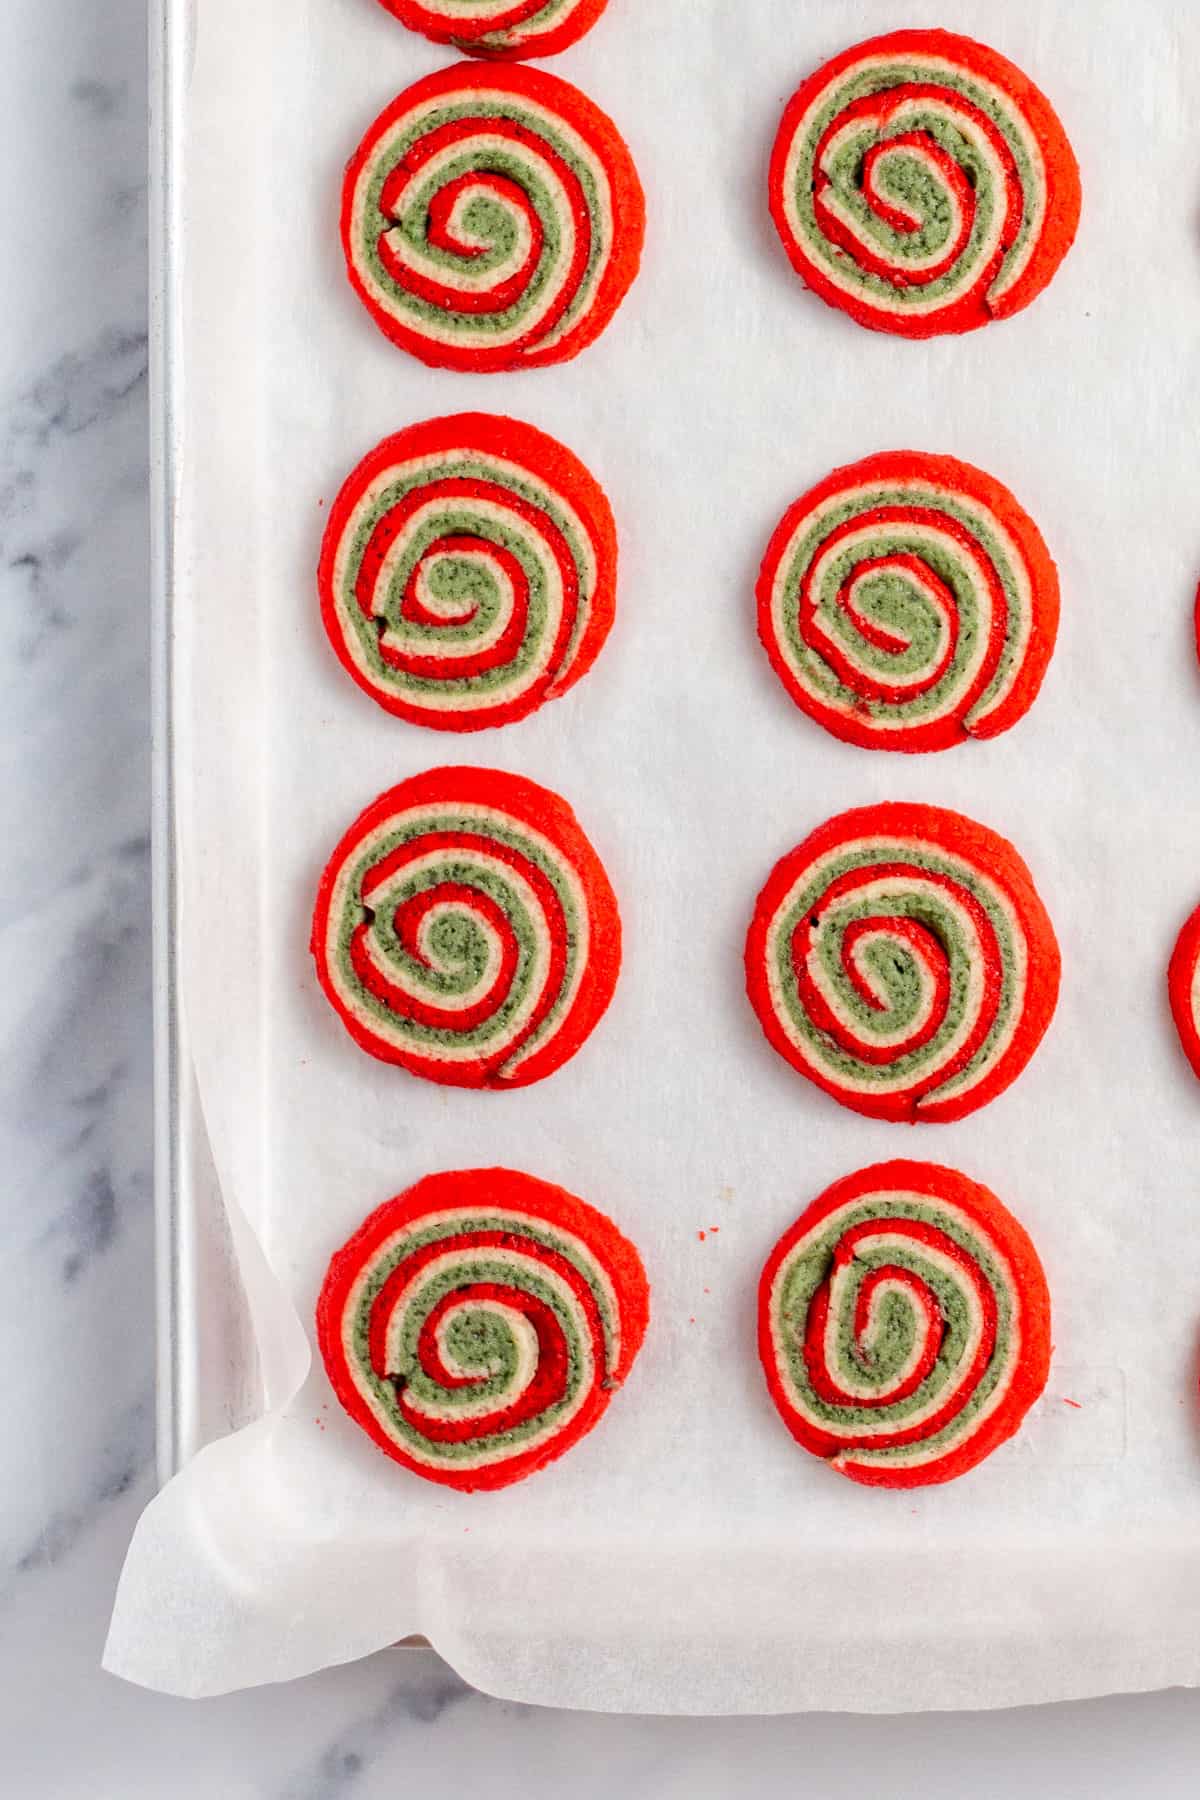 red white and green christmas pinwheel cookies on a baking sheet with parchment paper